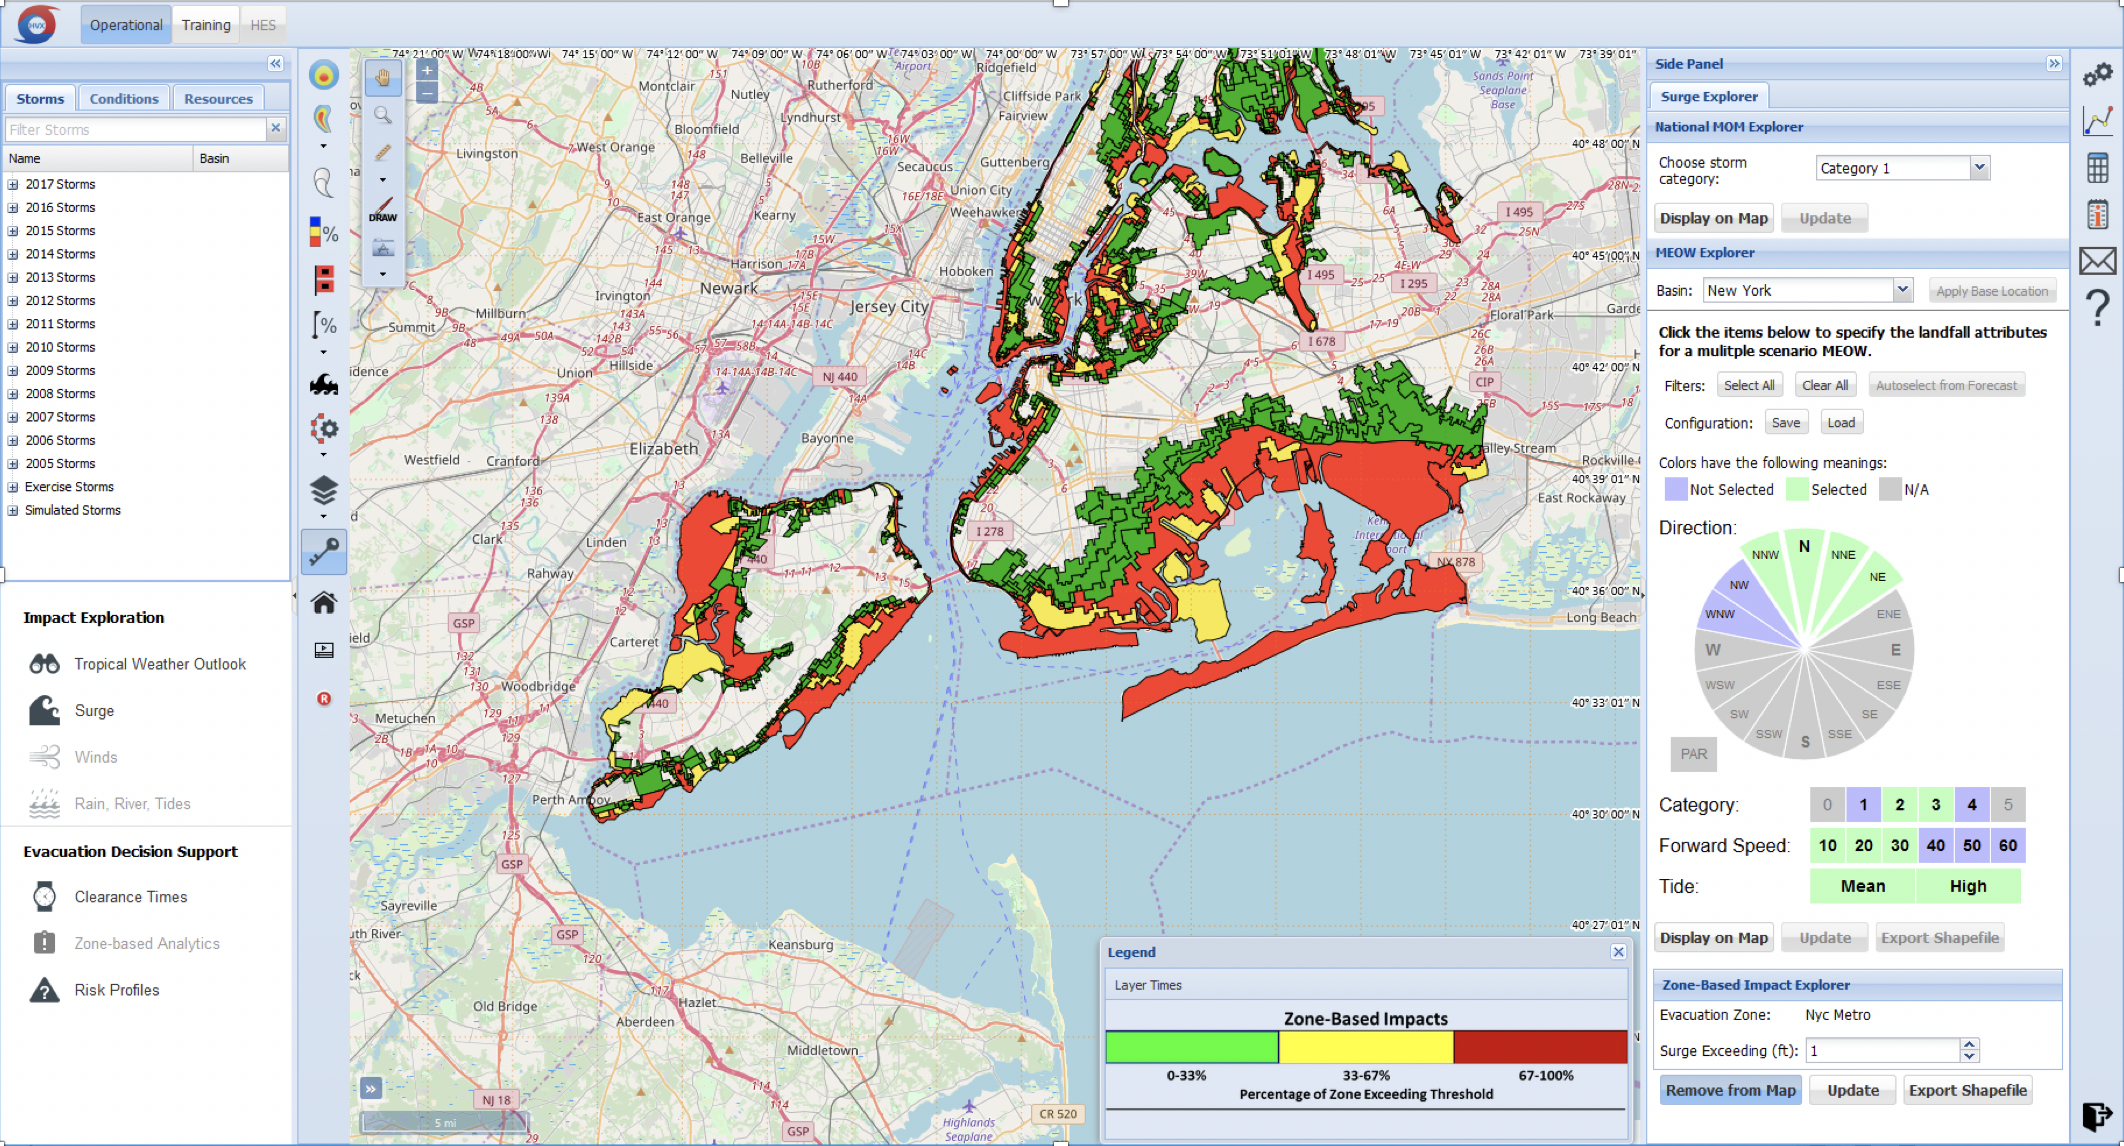 This example of an evacuation zone–based impact assessment in the HVX platform shows the percentage of area covered by more than one foot of water given the specified forecast parameters.